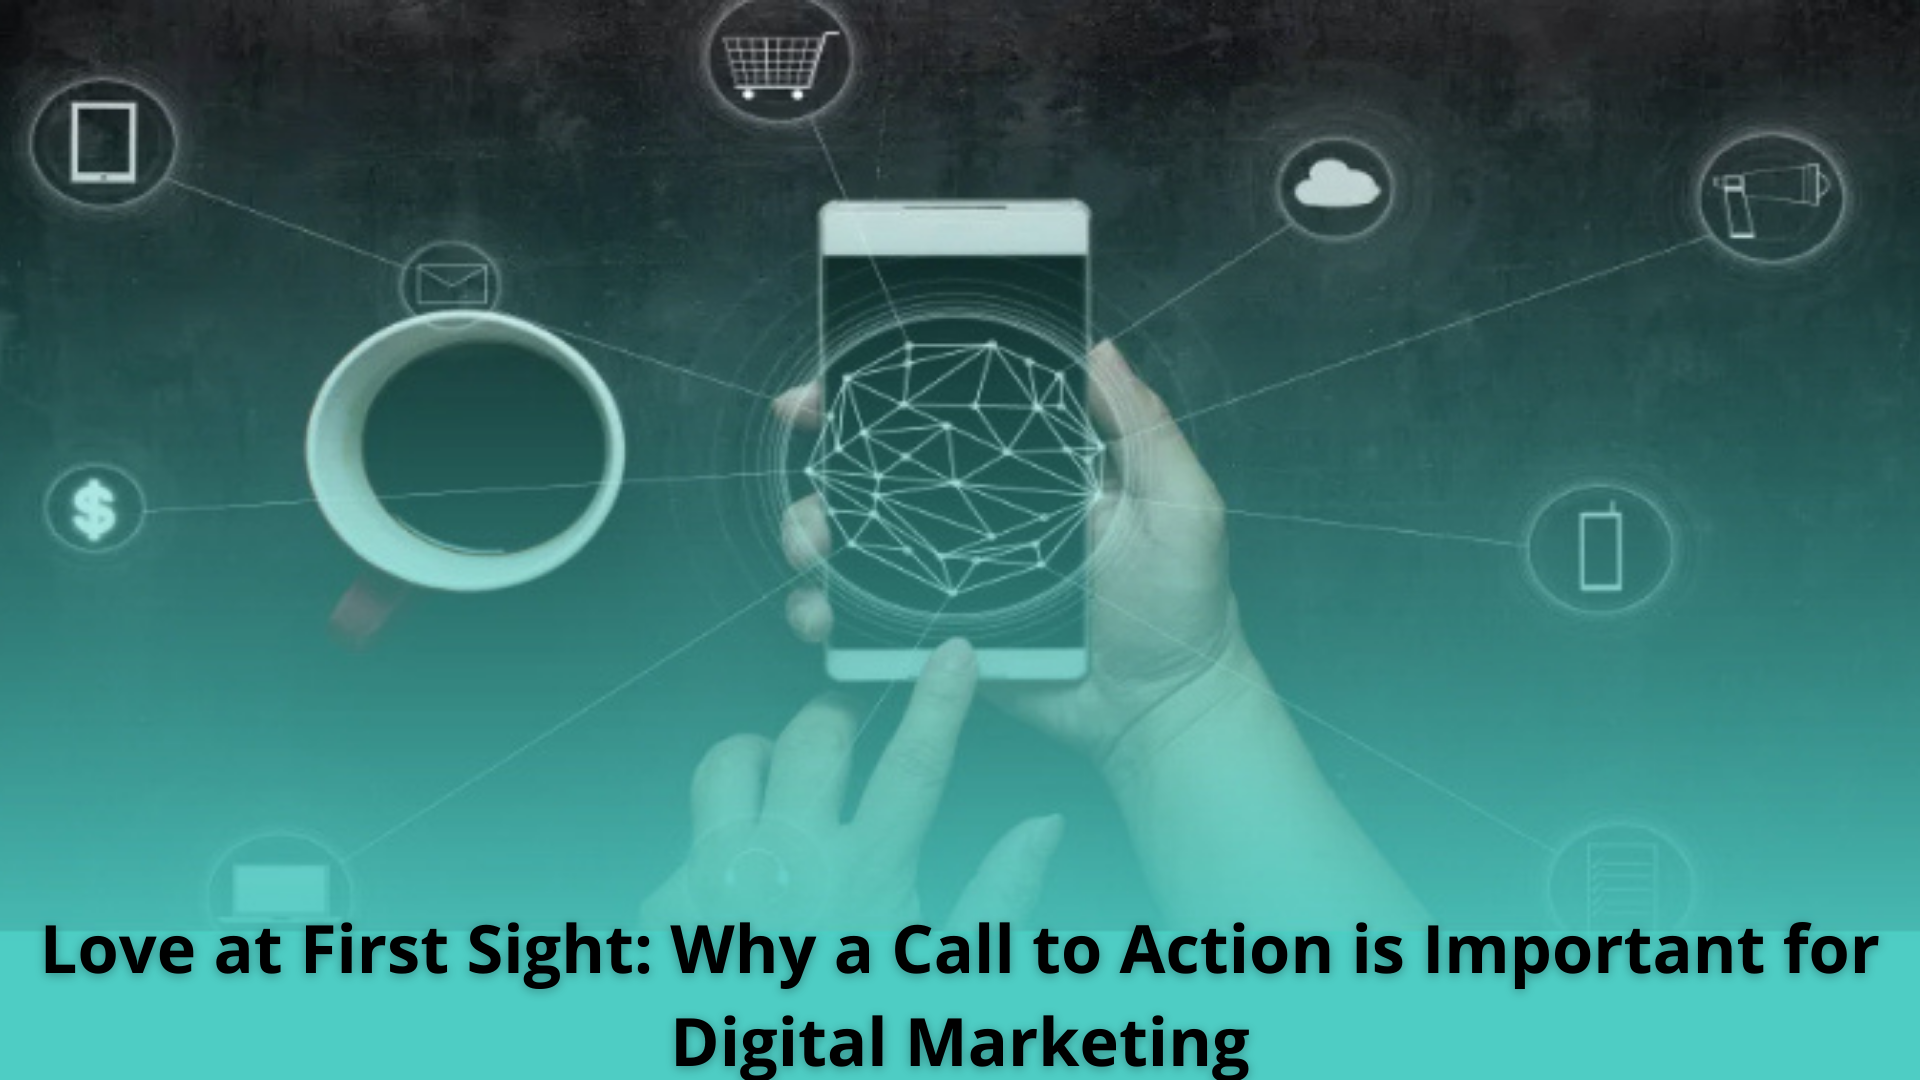 Love at first sight: Why a call to action is important for digital marketing